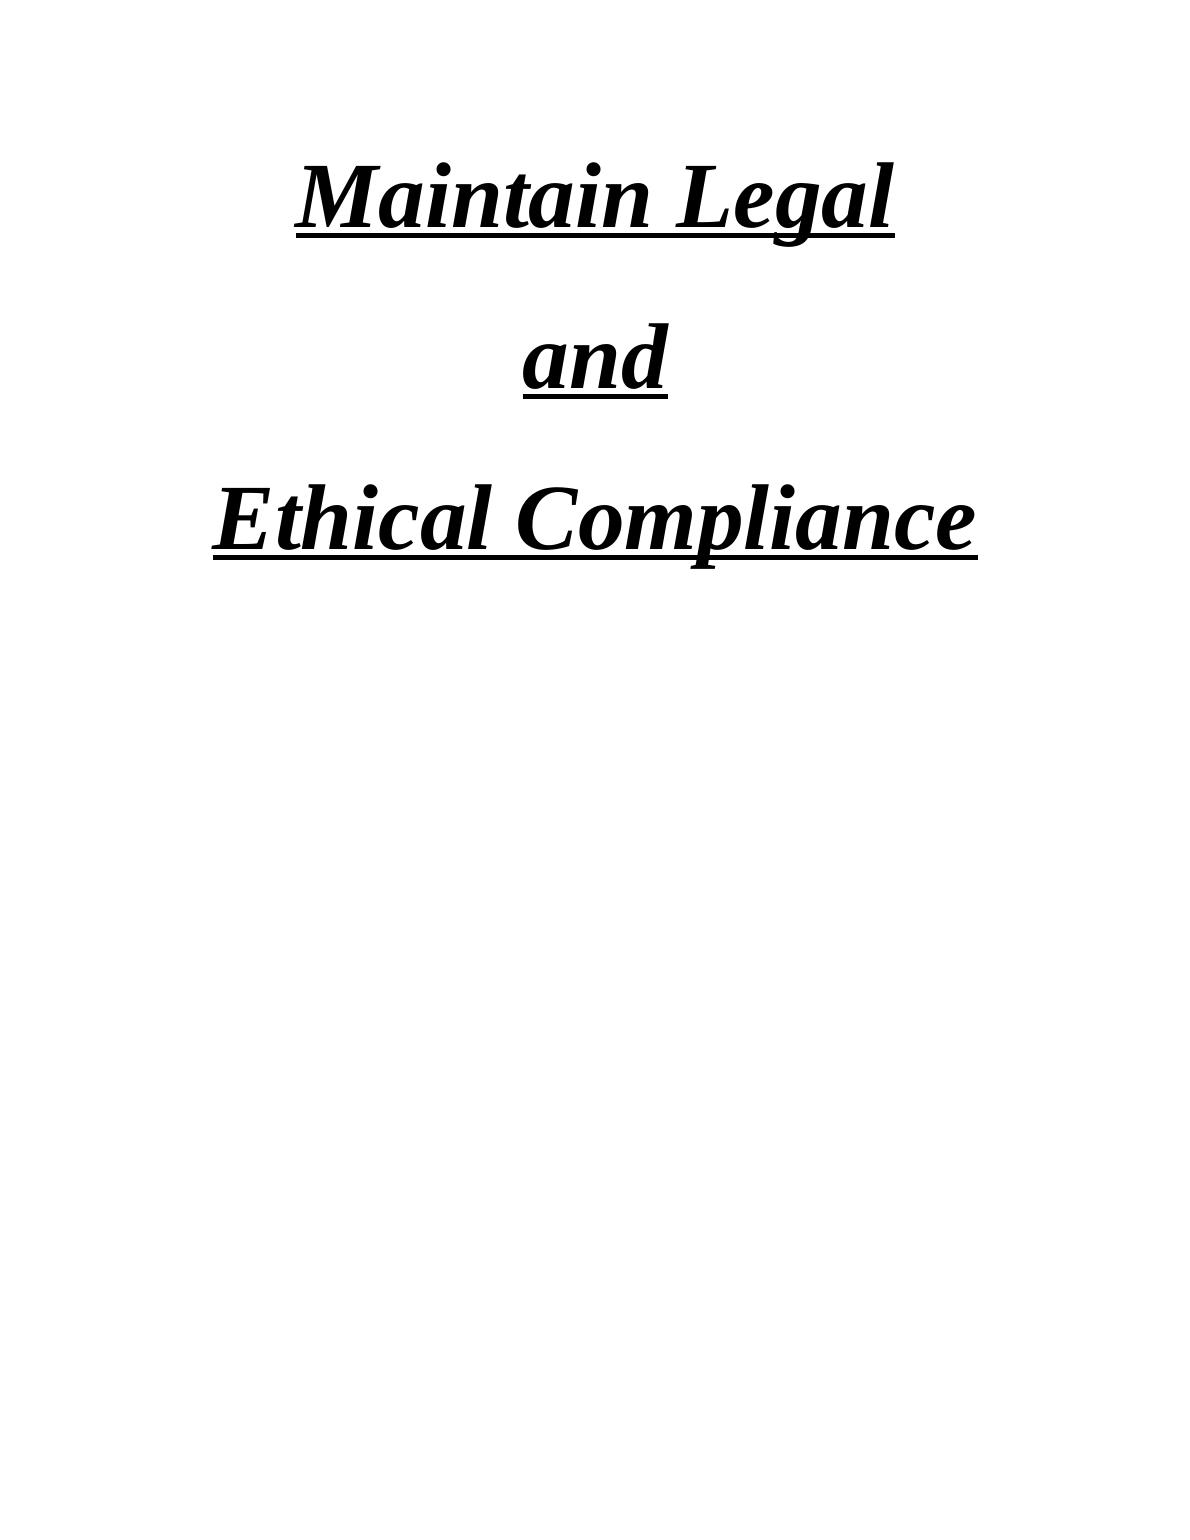 Maintaining Legal and Ethical Compliance INTRODUCTION 1: Sources of Information about Compliance Requirements_1